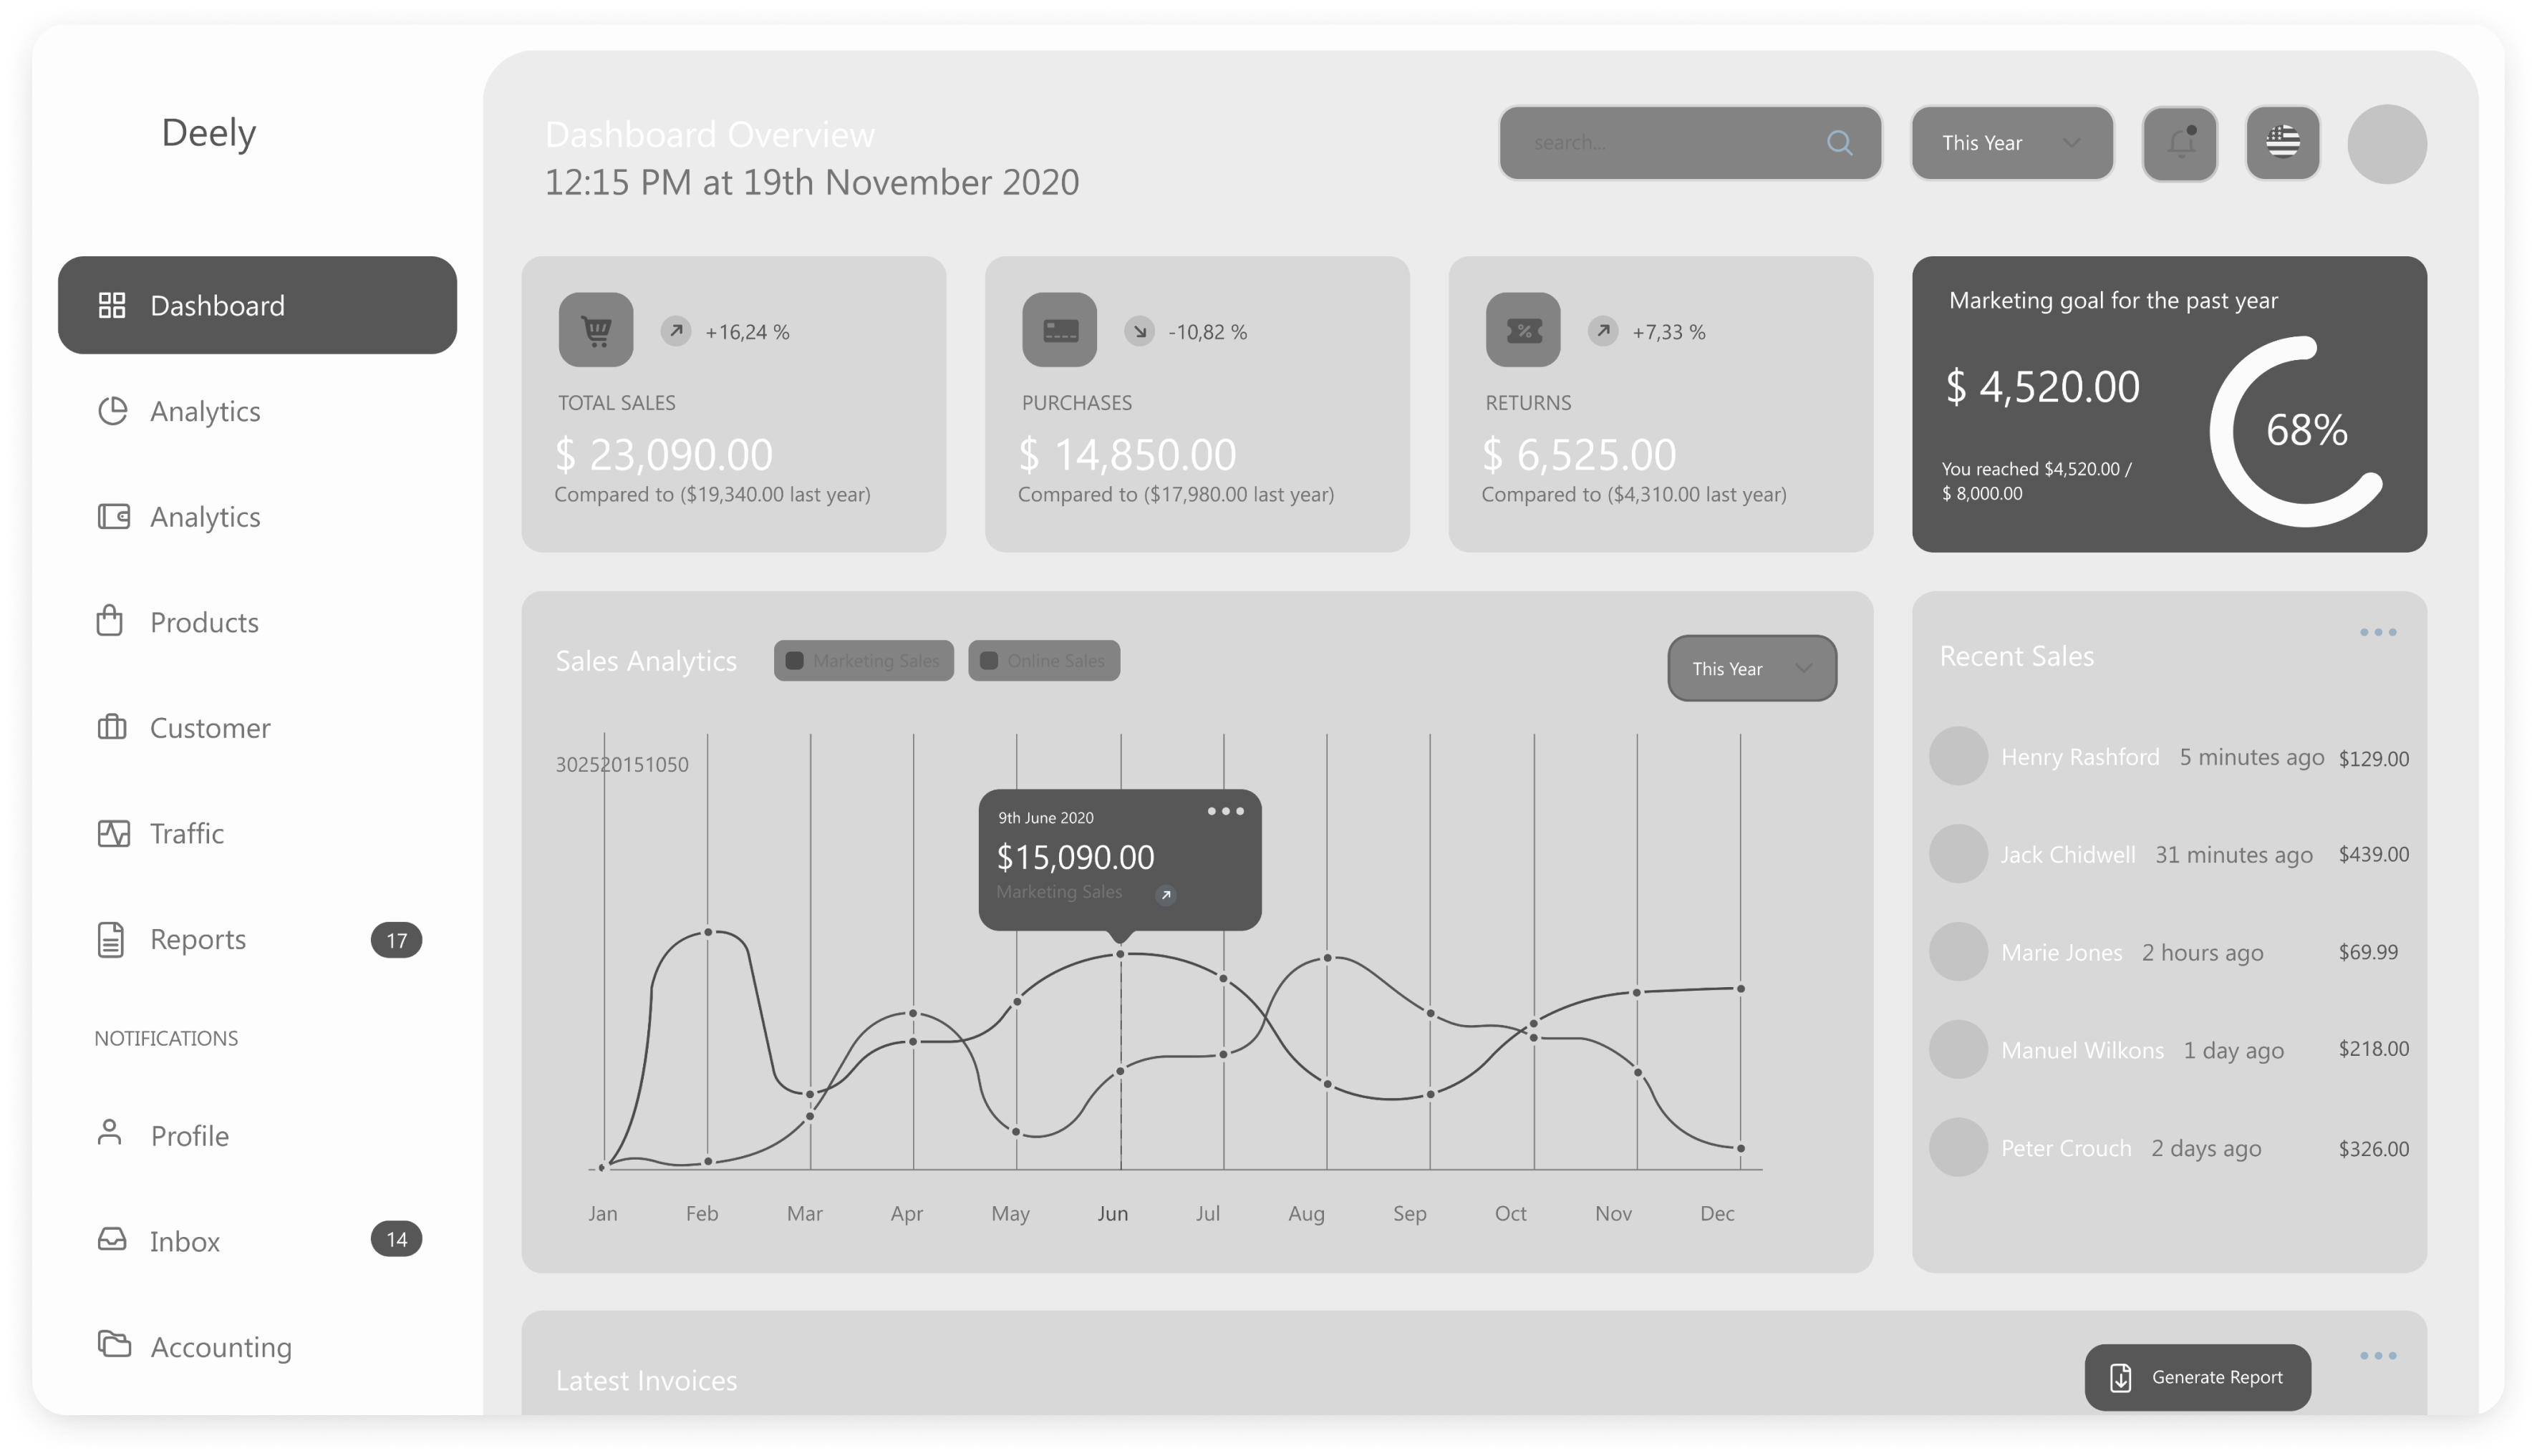 Wireframe of the Deely CRM system's main dashboard screen